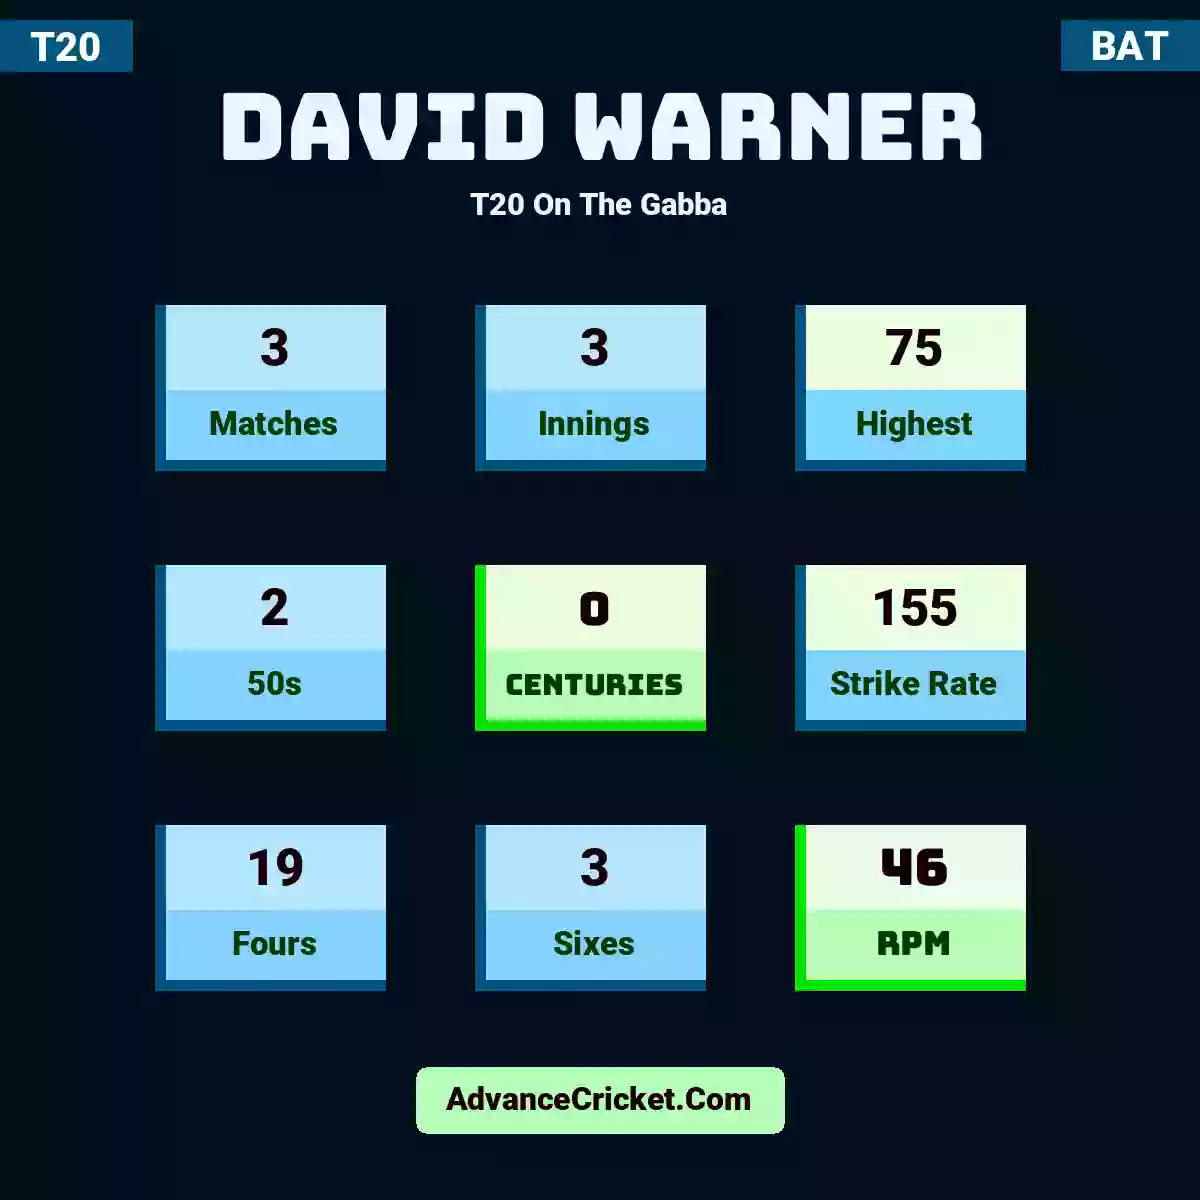 David Warner T20  On The Gabba, David Warner played 3 matches, scored 75 runs as highest, 2 half-centuries, and 0 centuries, with a strike rate of 155. D.Warner hit 19 fours and 3 sixes, with an RPM of 46.